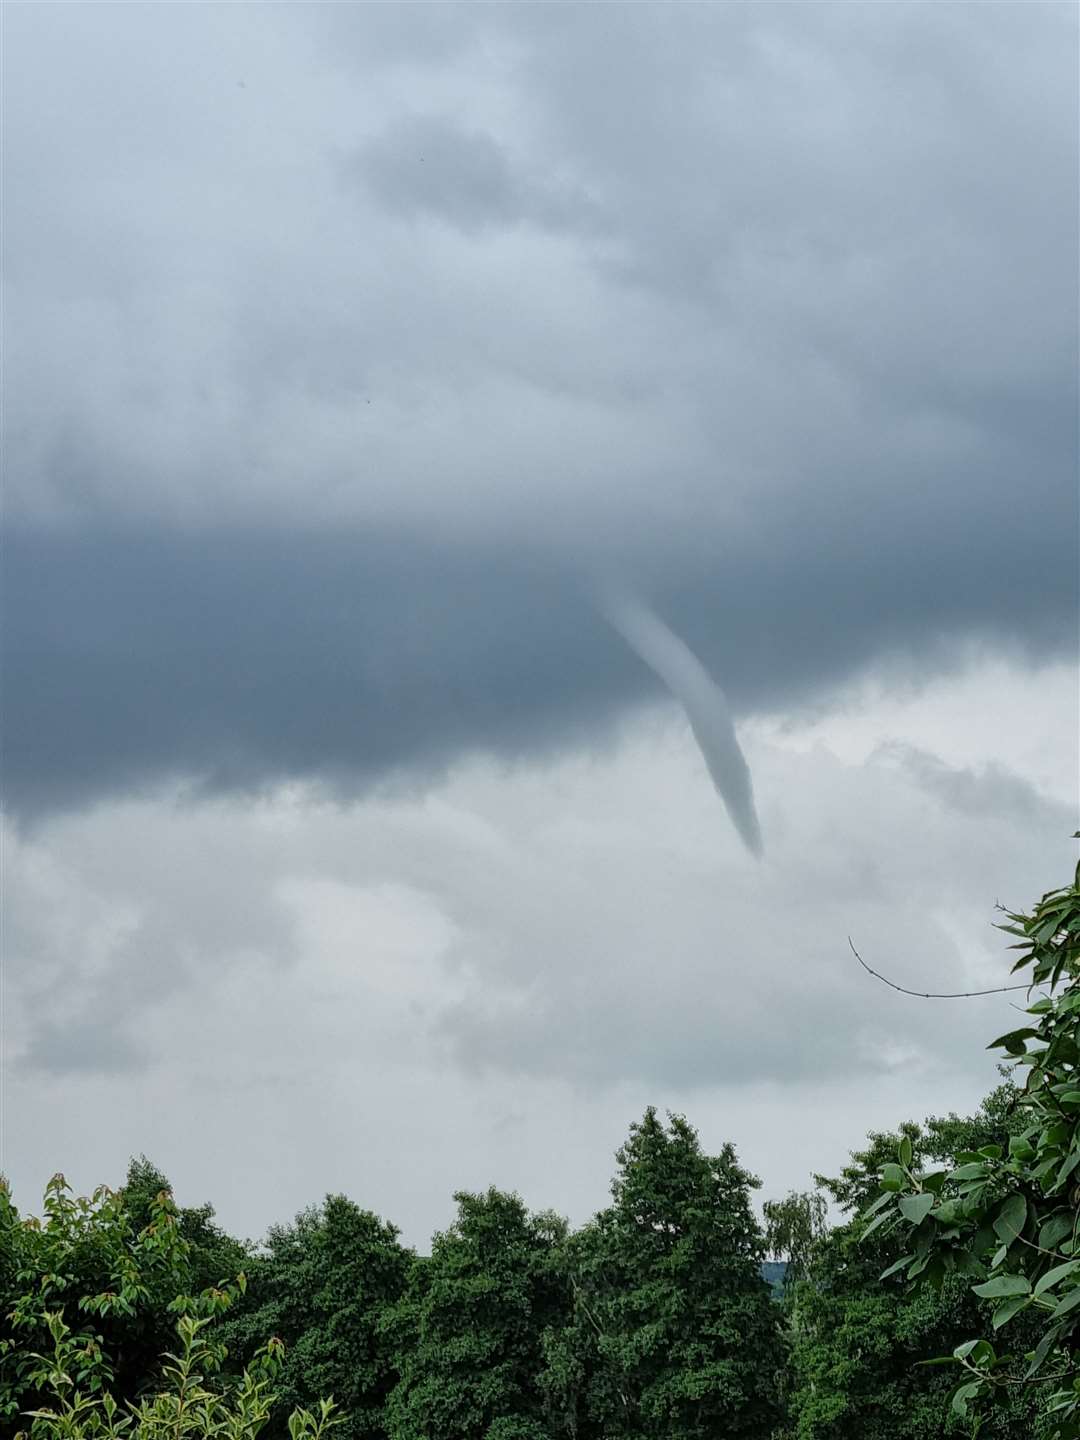 Lisa Webb spotted a funnel cloud over Stockbury on Sunday afternoon when several were spotted across the county. Picture: Lisa Webb